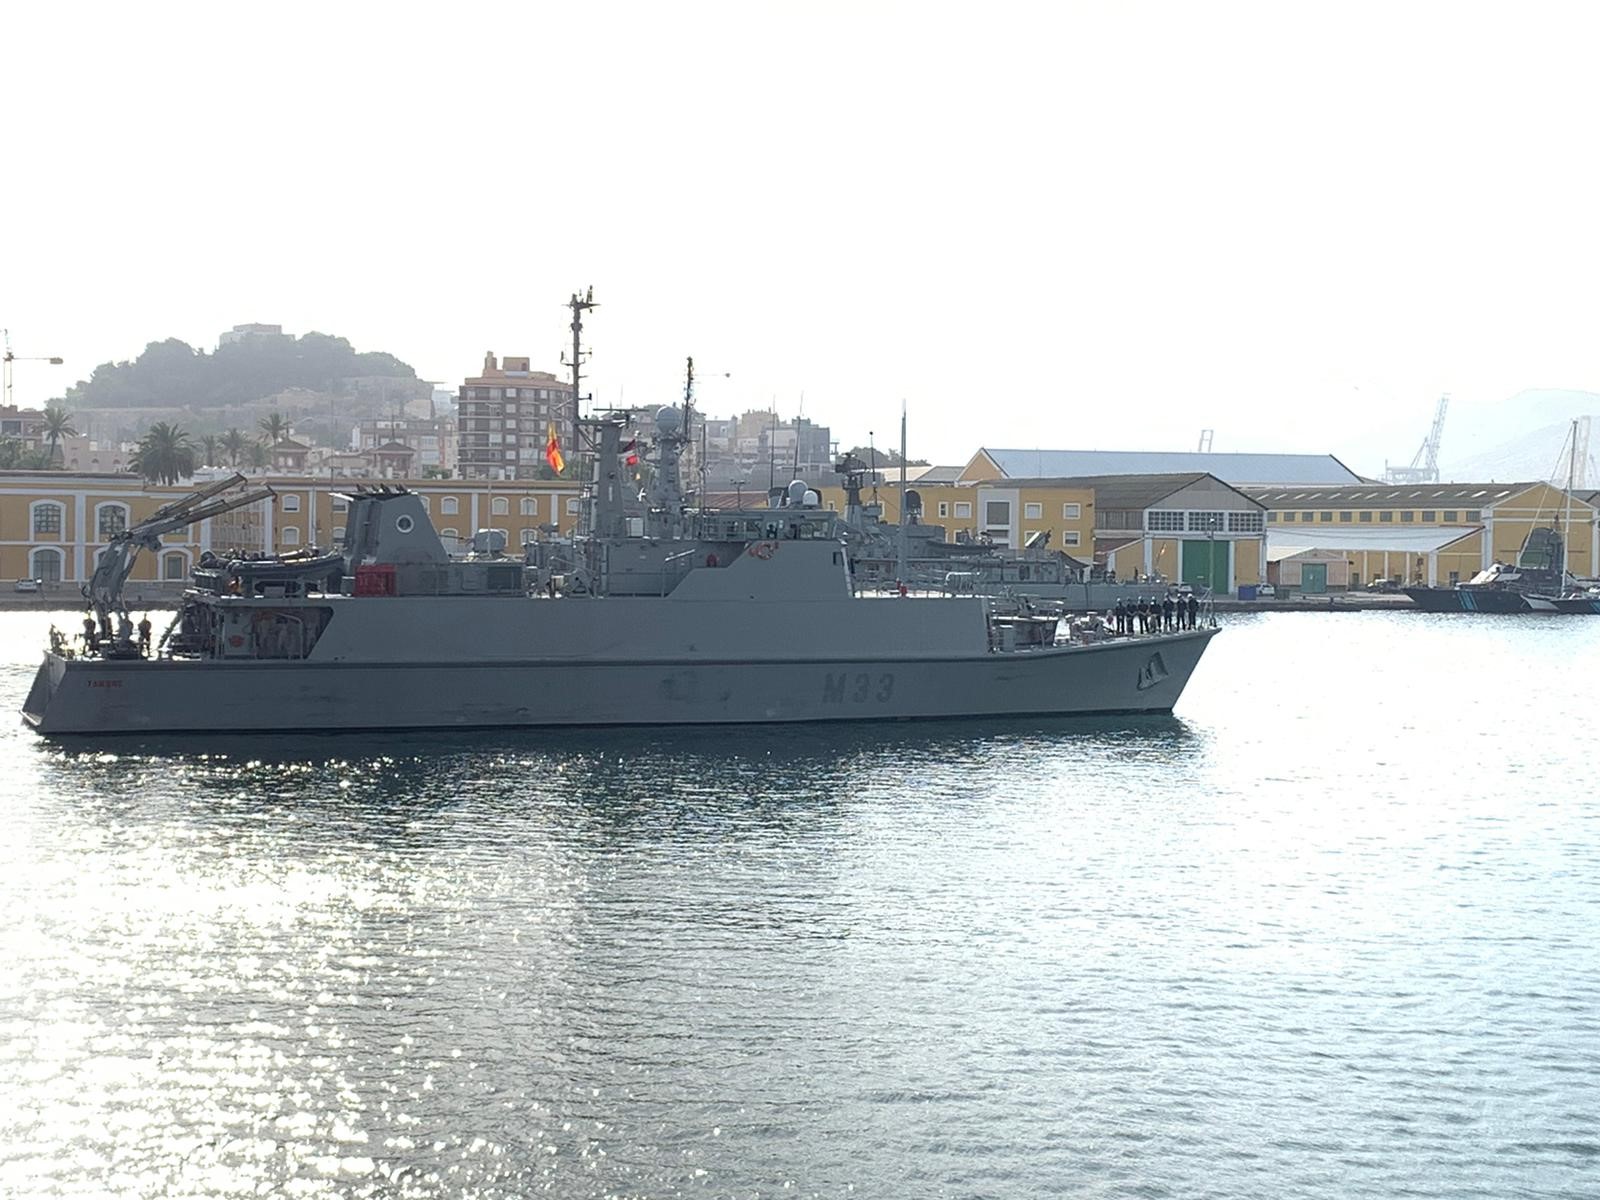 Mine hunter 'Tambre' sets off to join NATO's  Standing Maritime Group